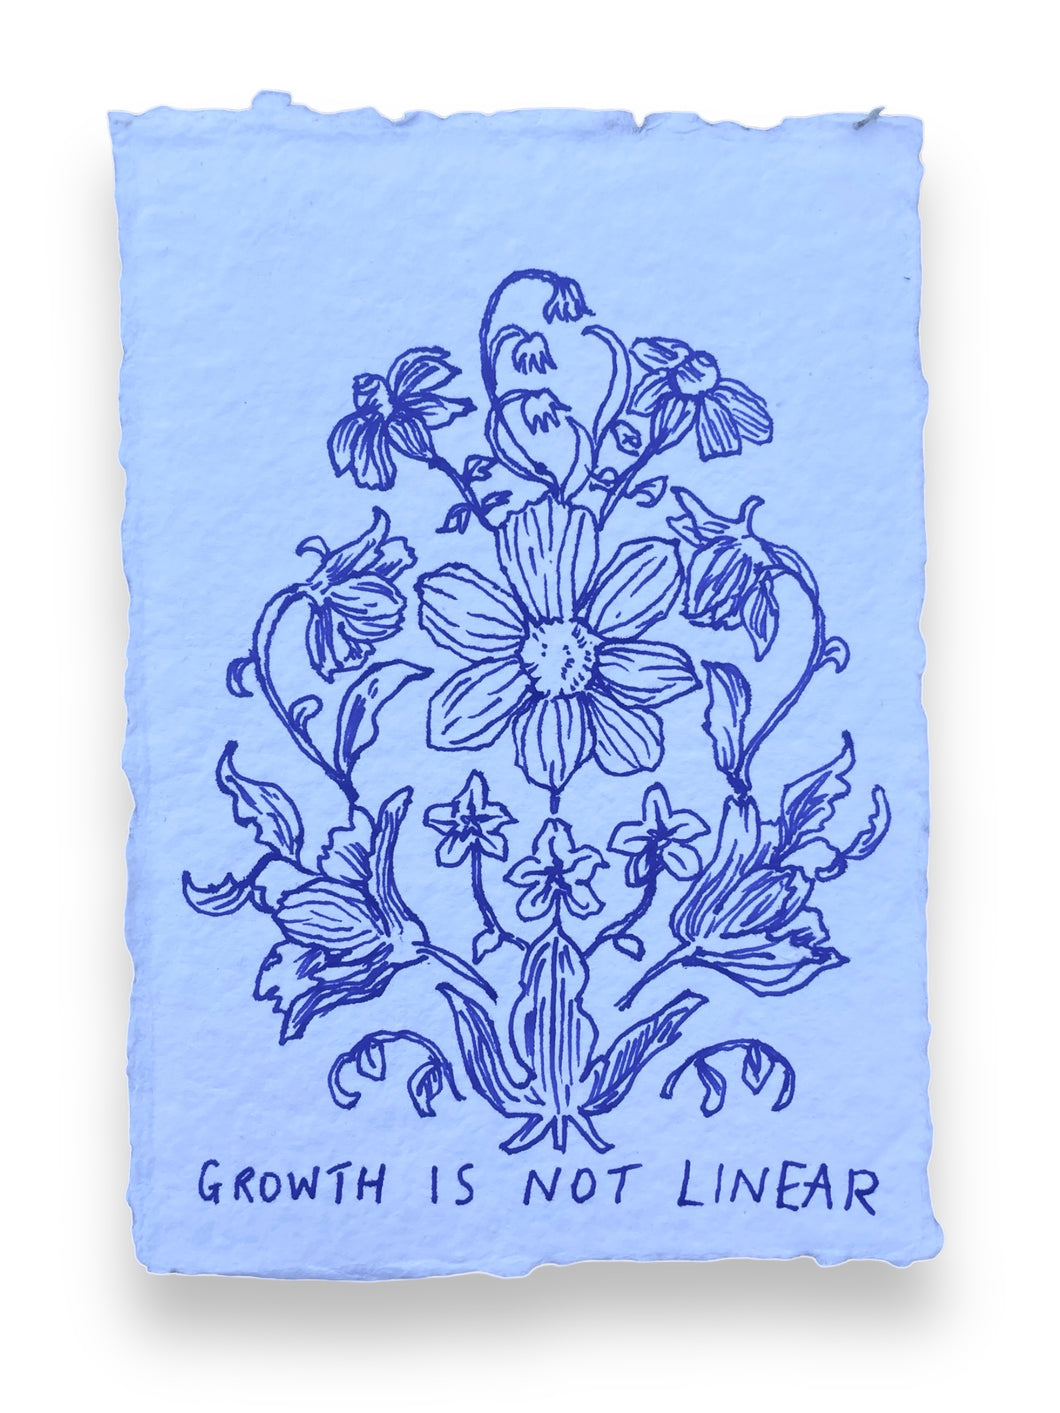 Original Ink Flower Drawing on Handmade Paper Growth is not Linear